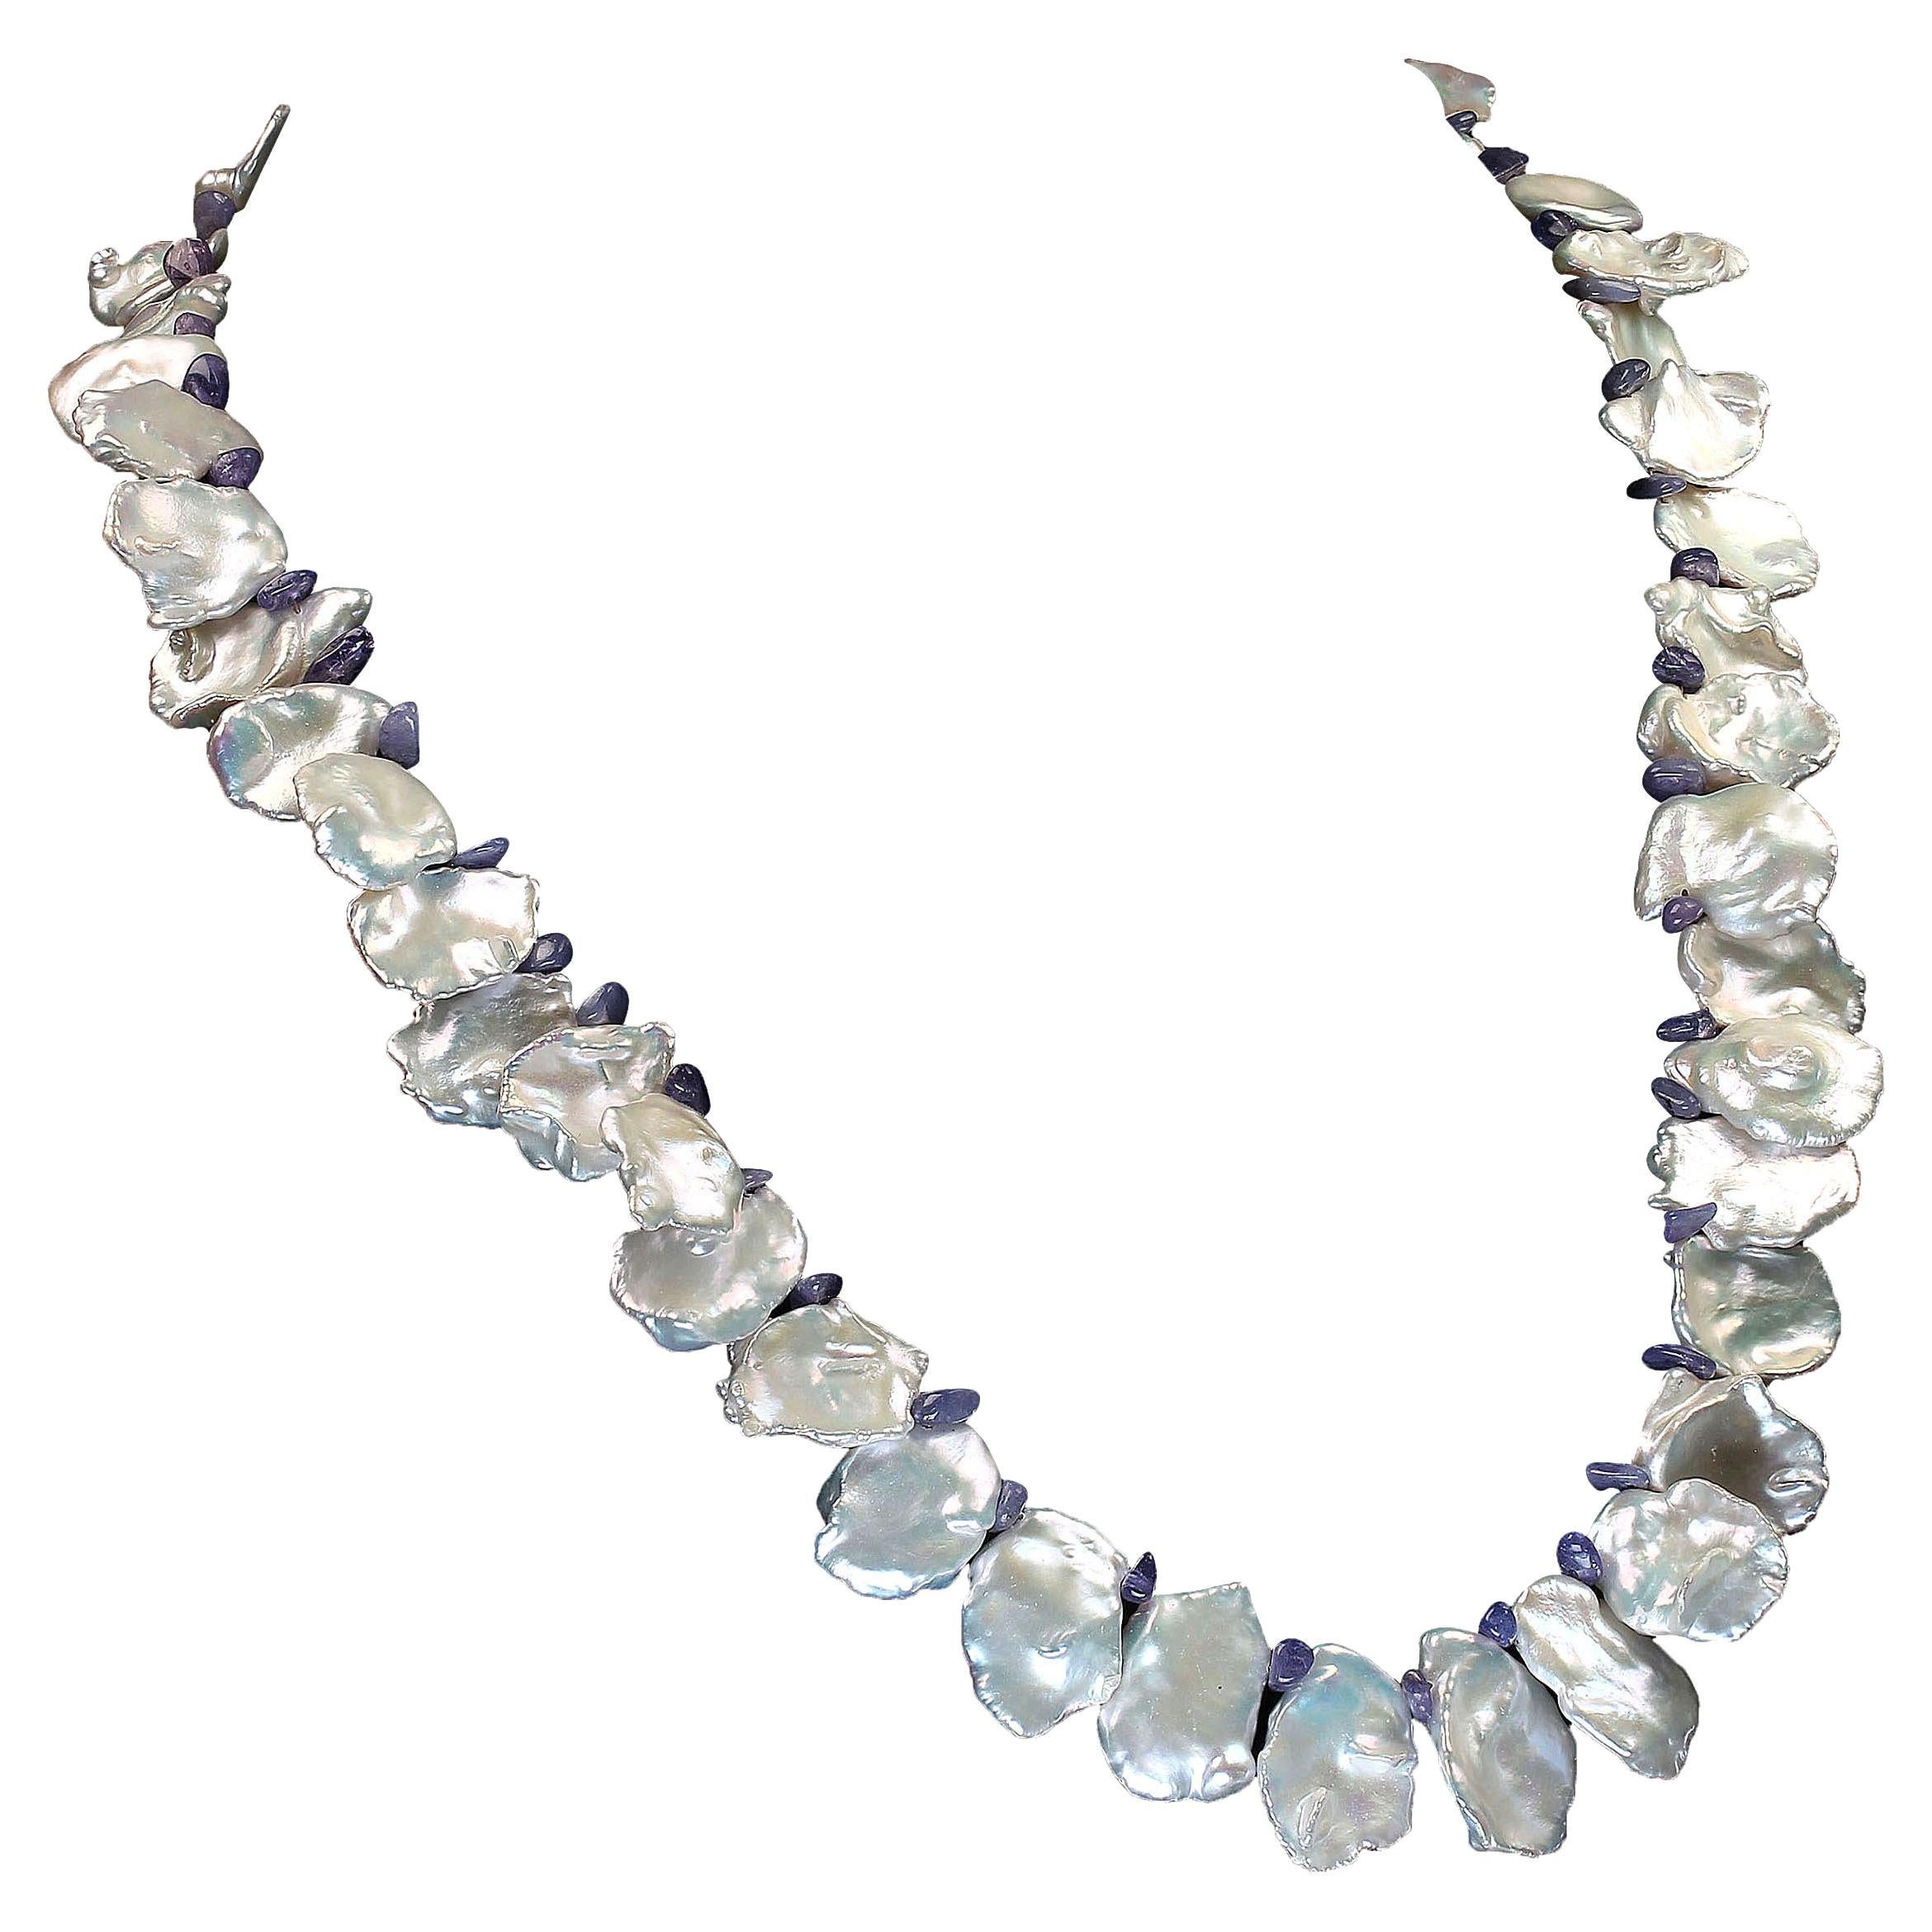 Artisan AJD Fluttering White Keshi Pearl Necklace Tanzanite Accents June Birthstone